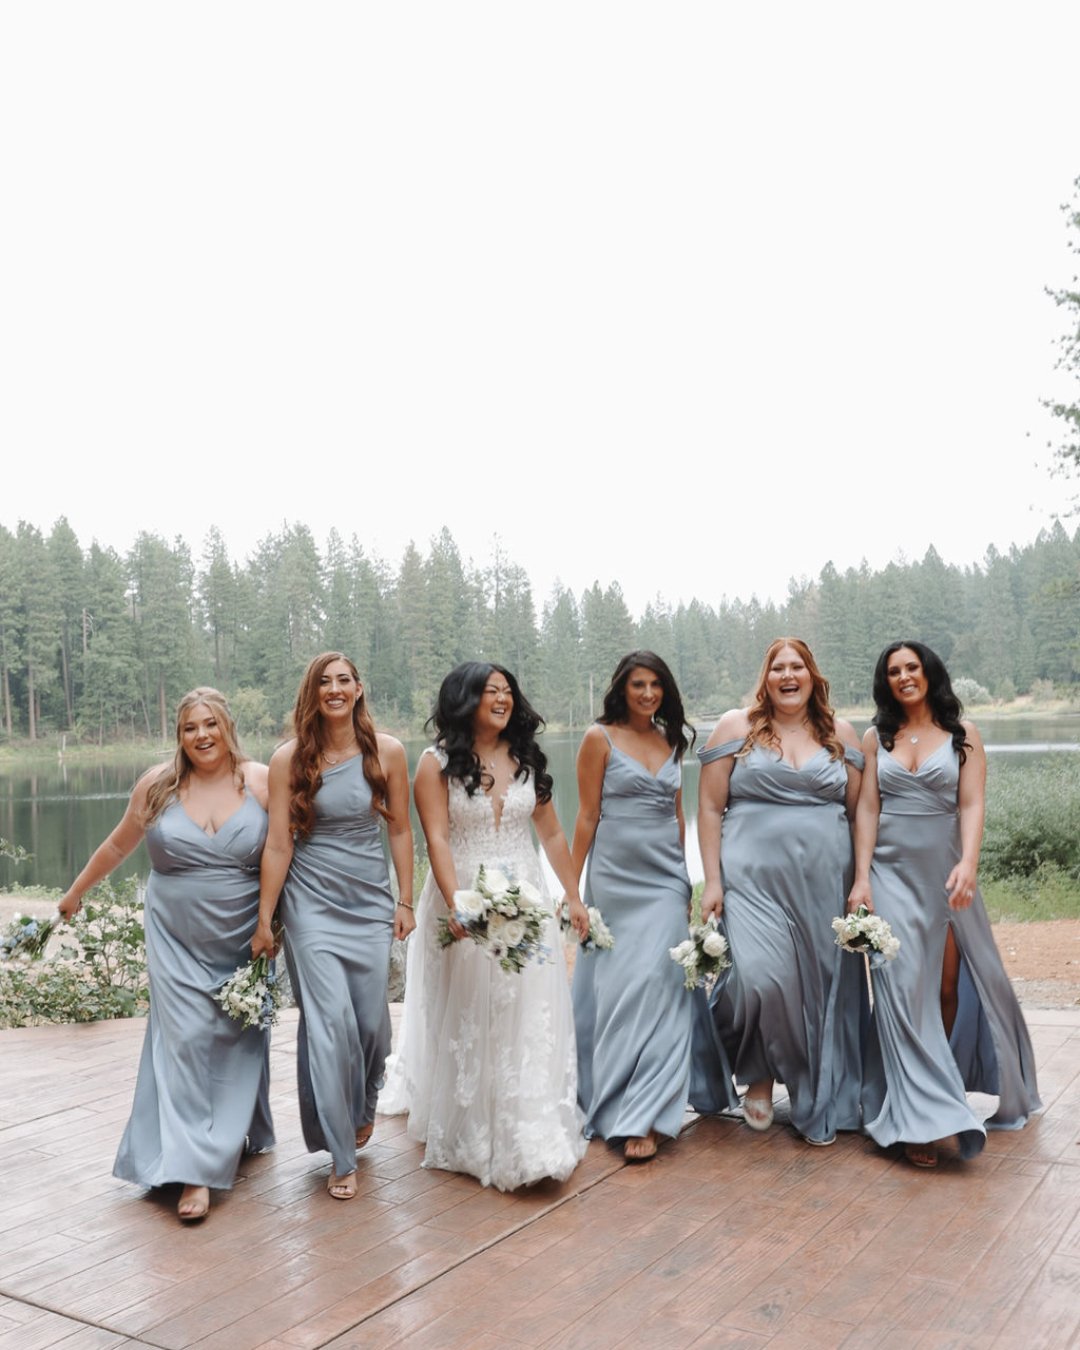 Obsessed with Tiffany's 'maids in blue! Their dusty satin gowns looked extra stunning on the overcast wedding day 🤍⁣
Photo: @reveriefilms.co⁣
Florals: @thefloralstudio.byjess